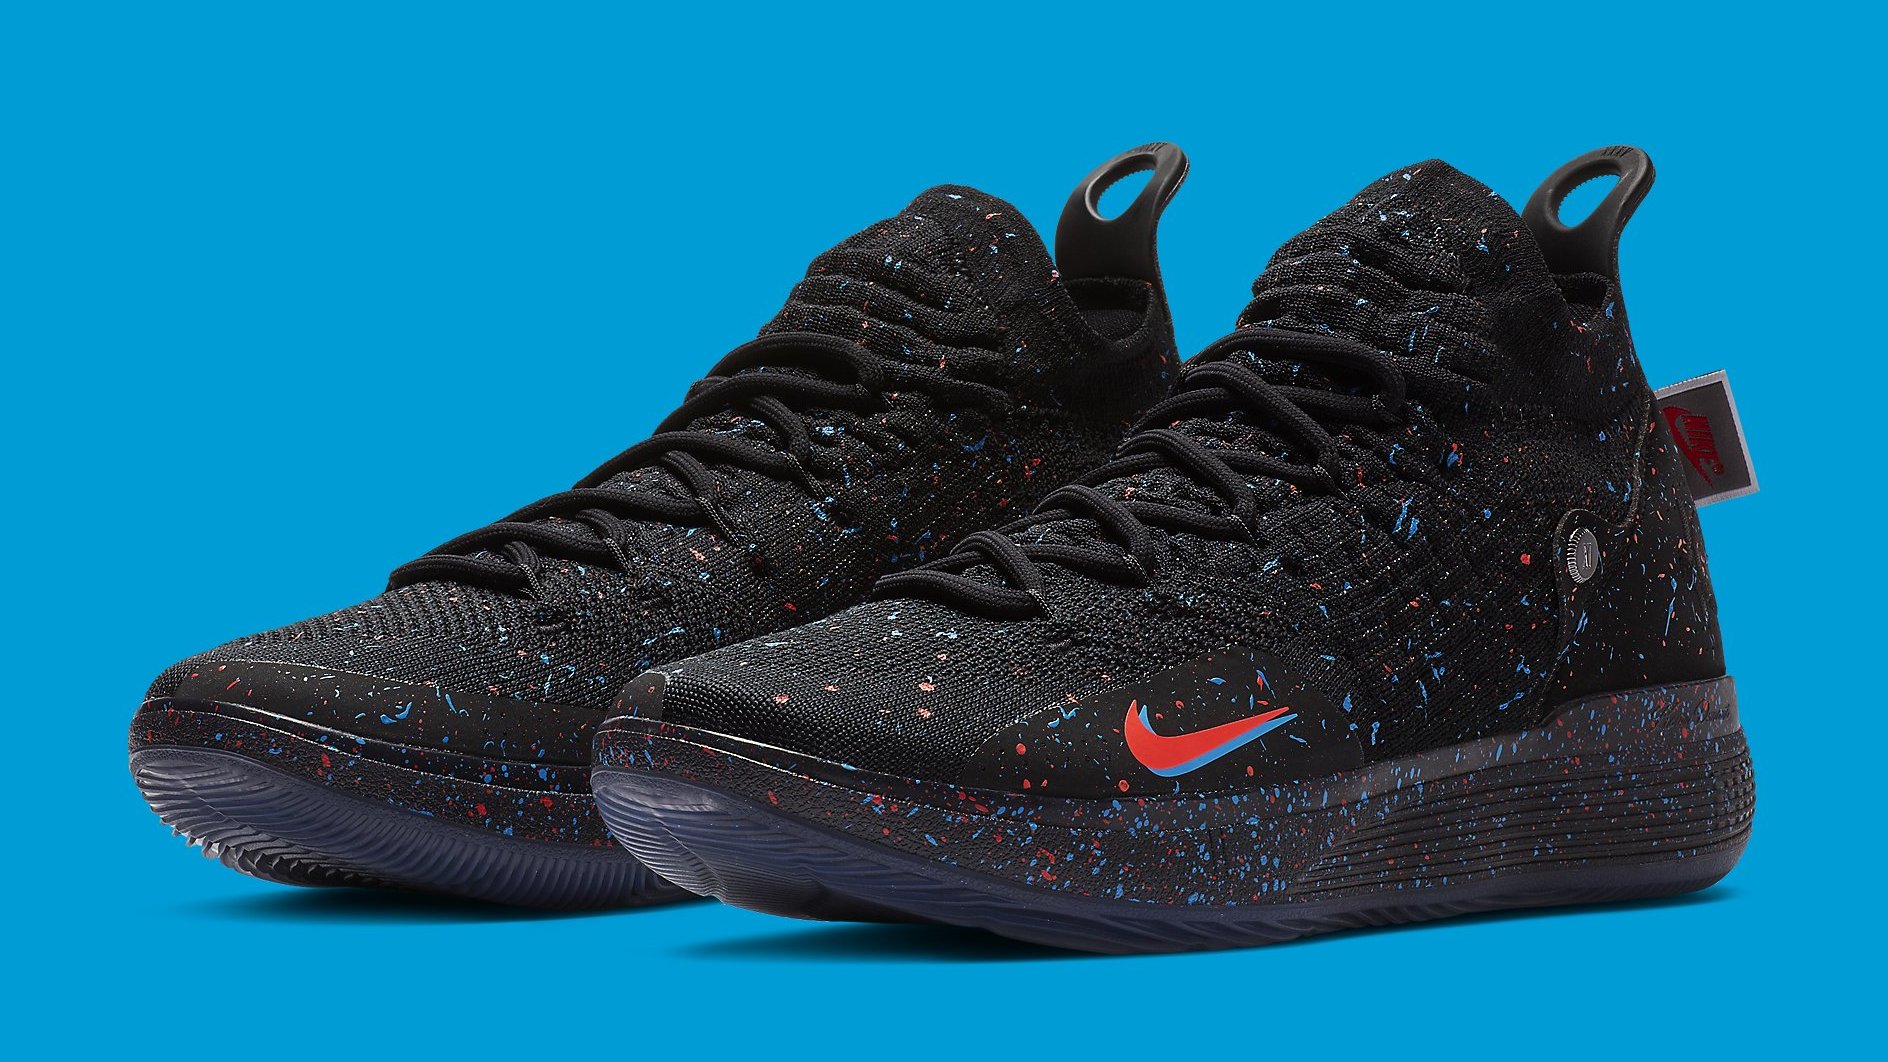 kd 11 red and black